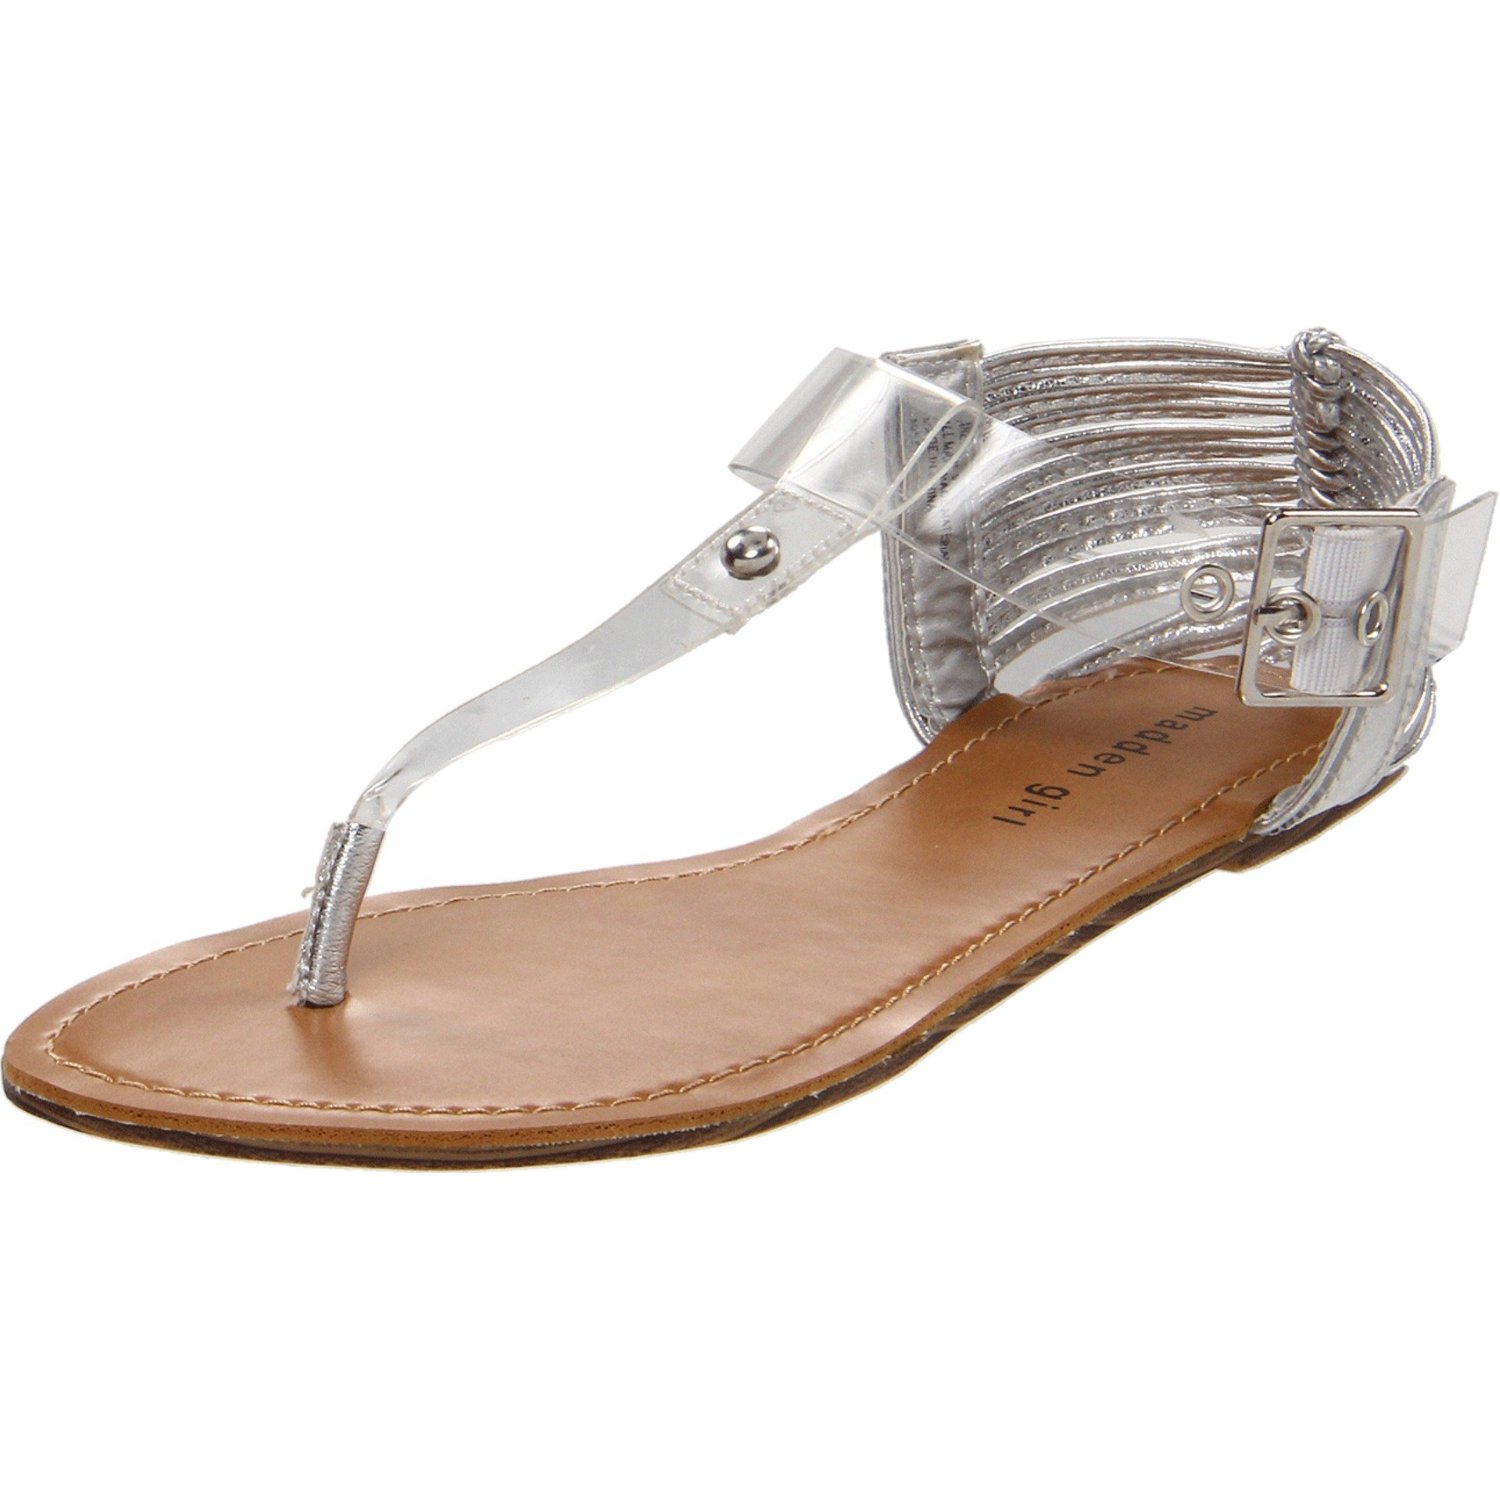 Madden Girl Ankle Strap Sandal in Silver (clear) | Lyst